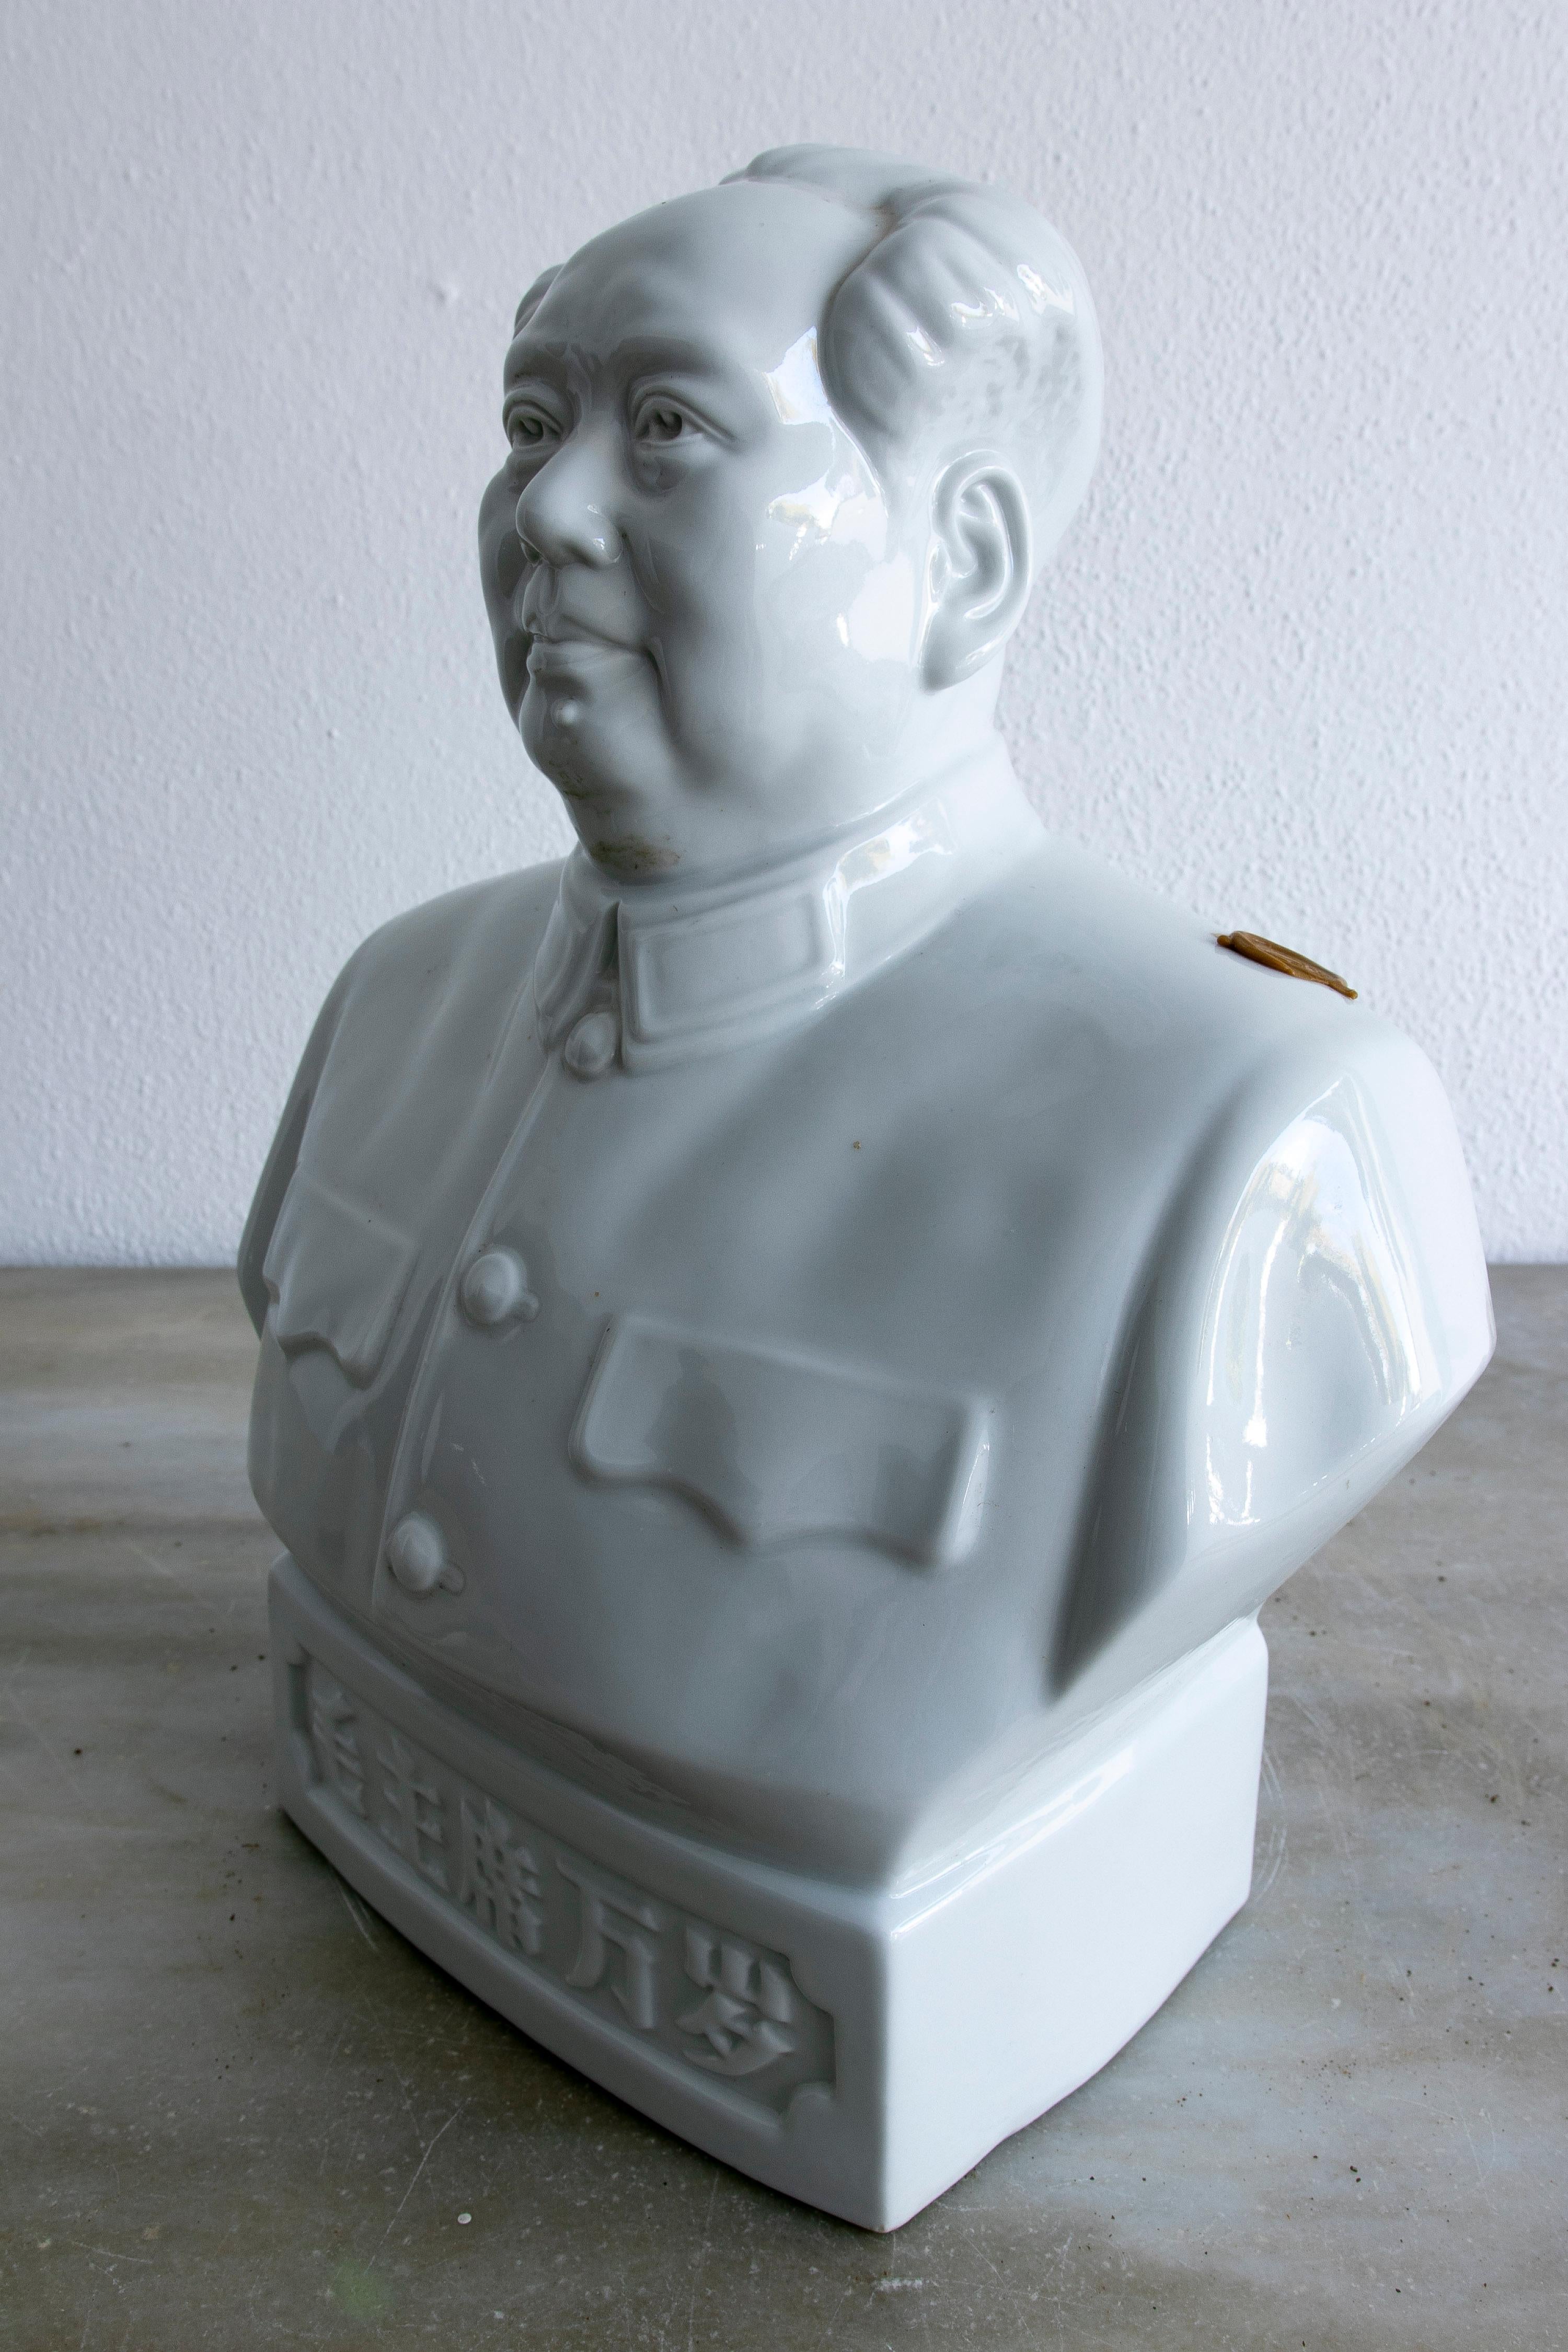 20th Century 1990s Chinese Porcelain Figure Bust of Mao Zedong For Sale